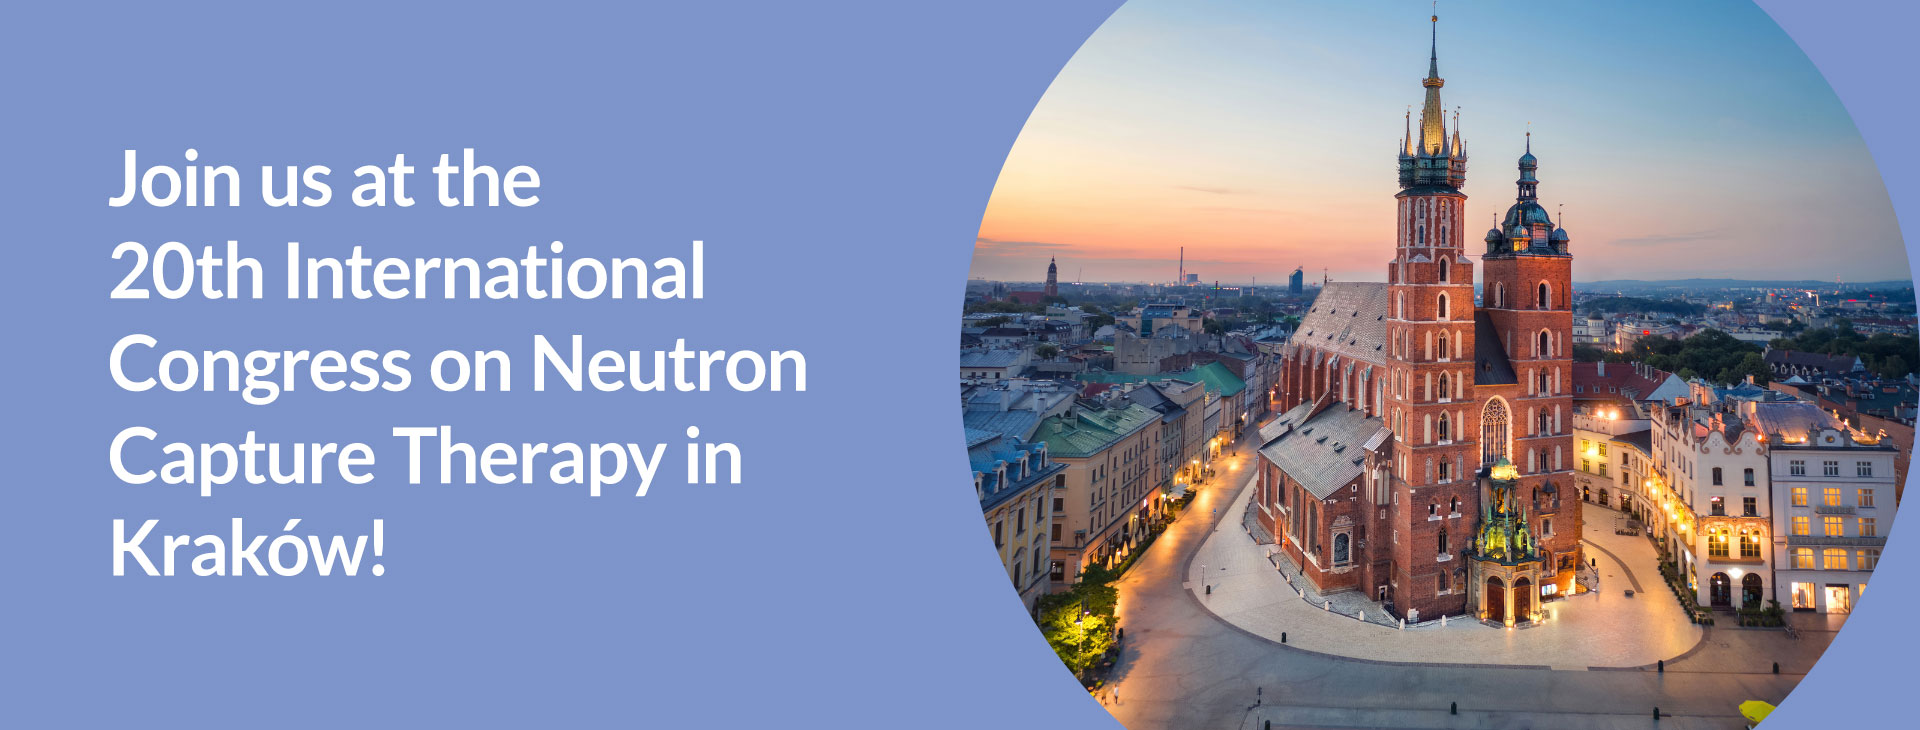 Join Us at the 20th International Congress on Neutron Capture Therapy in Kraków!